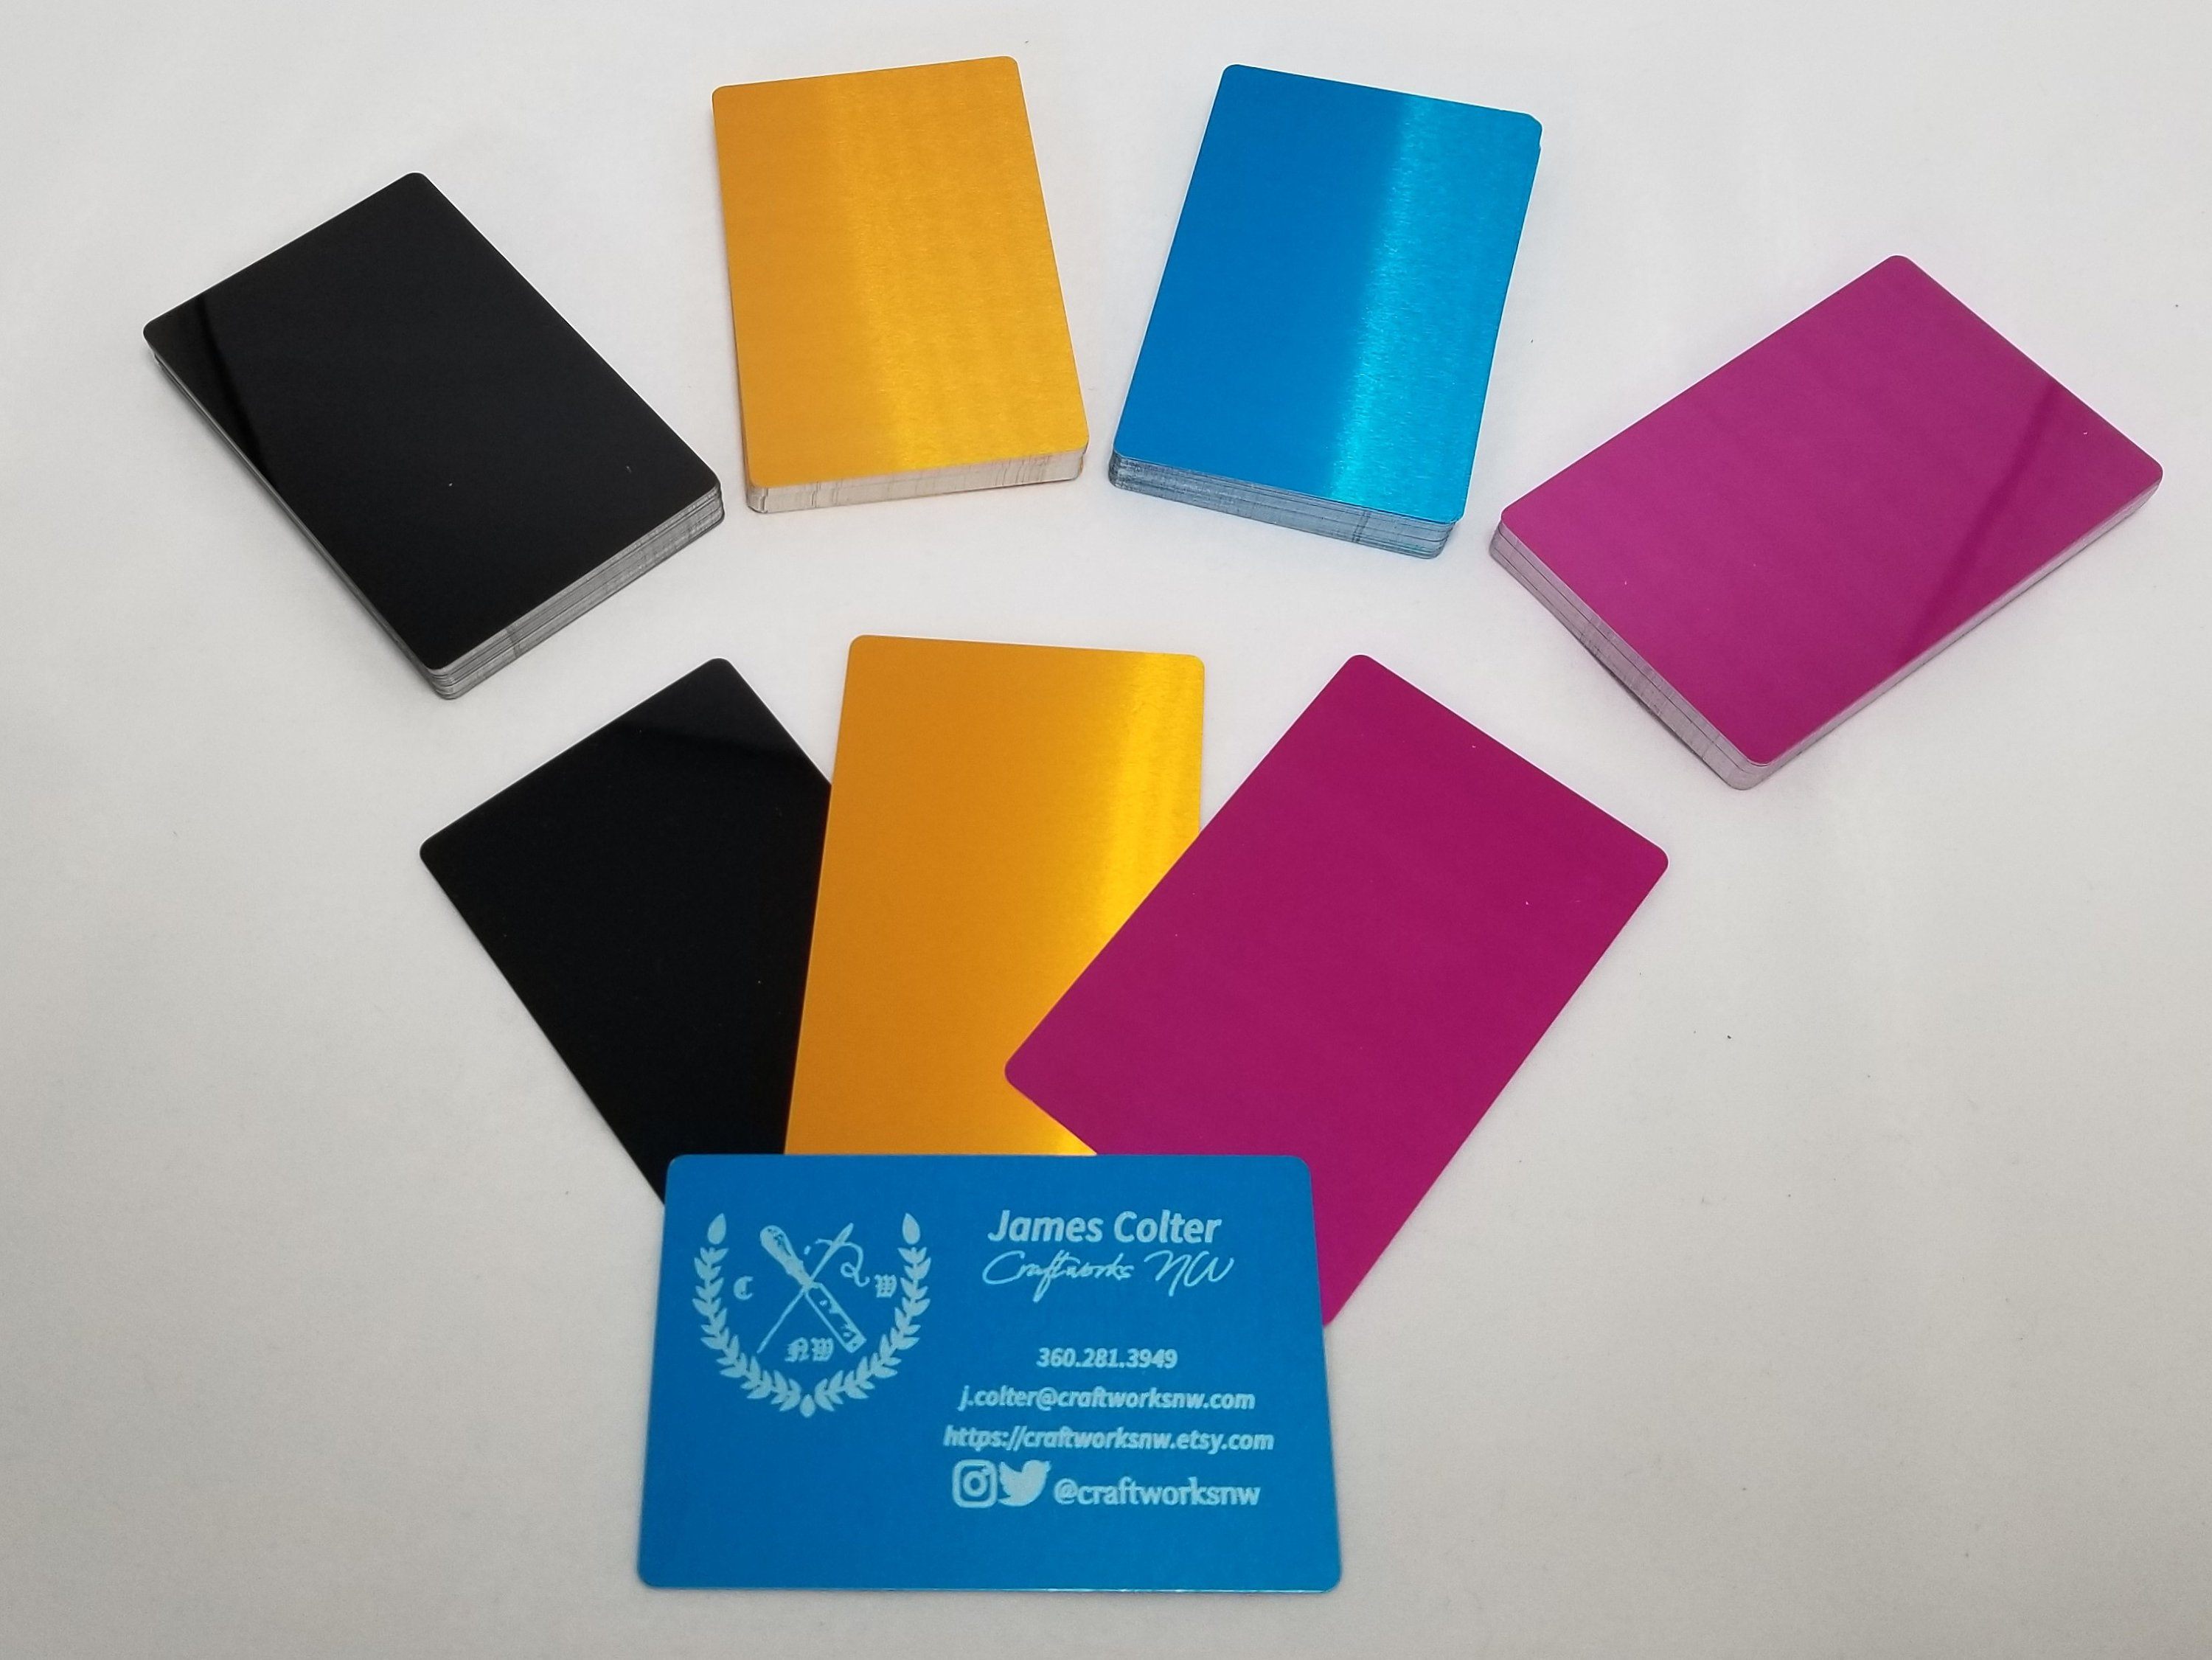 Stunning anodized aluminum business card blank for Decor and